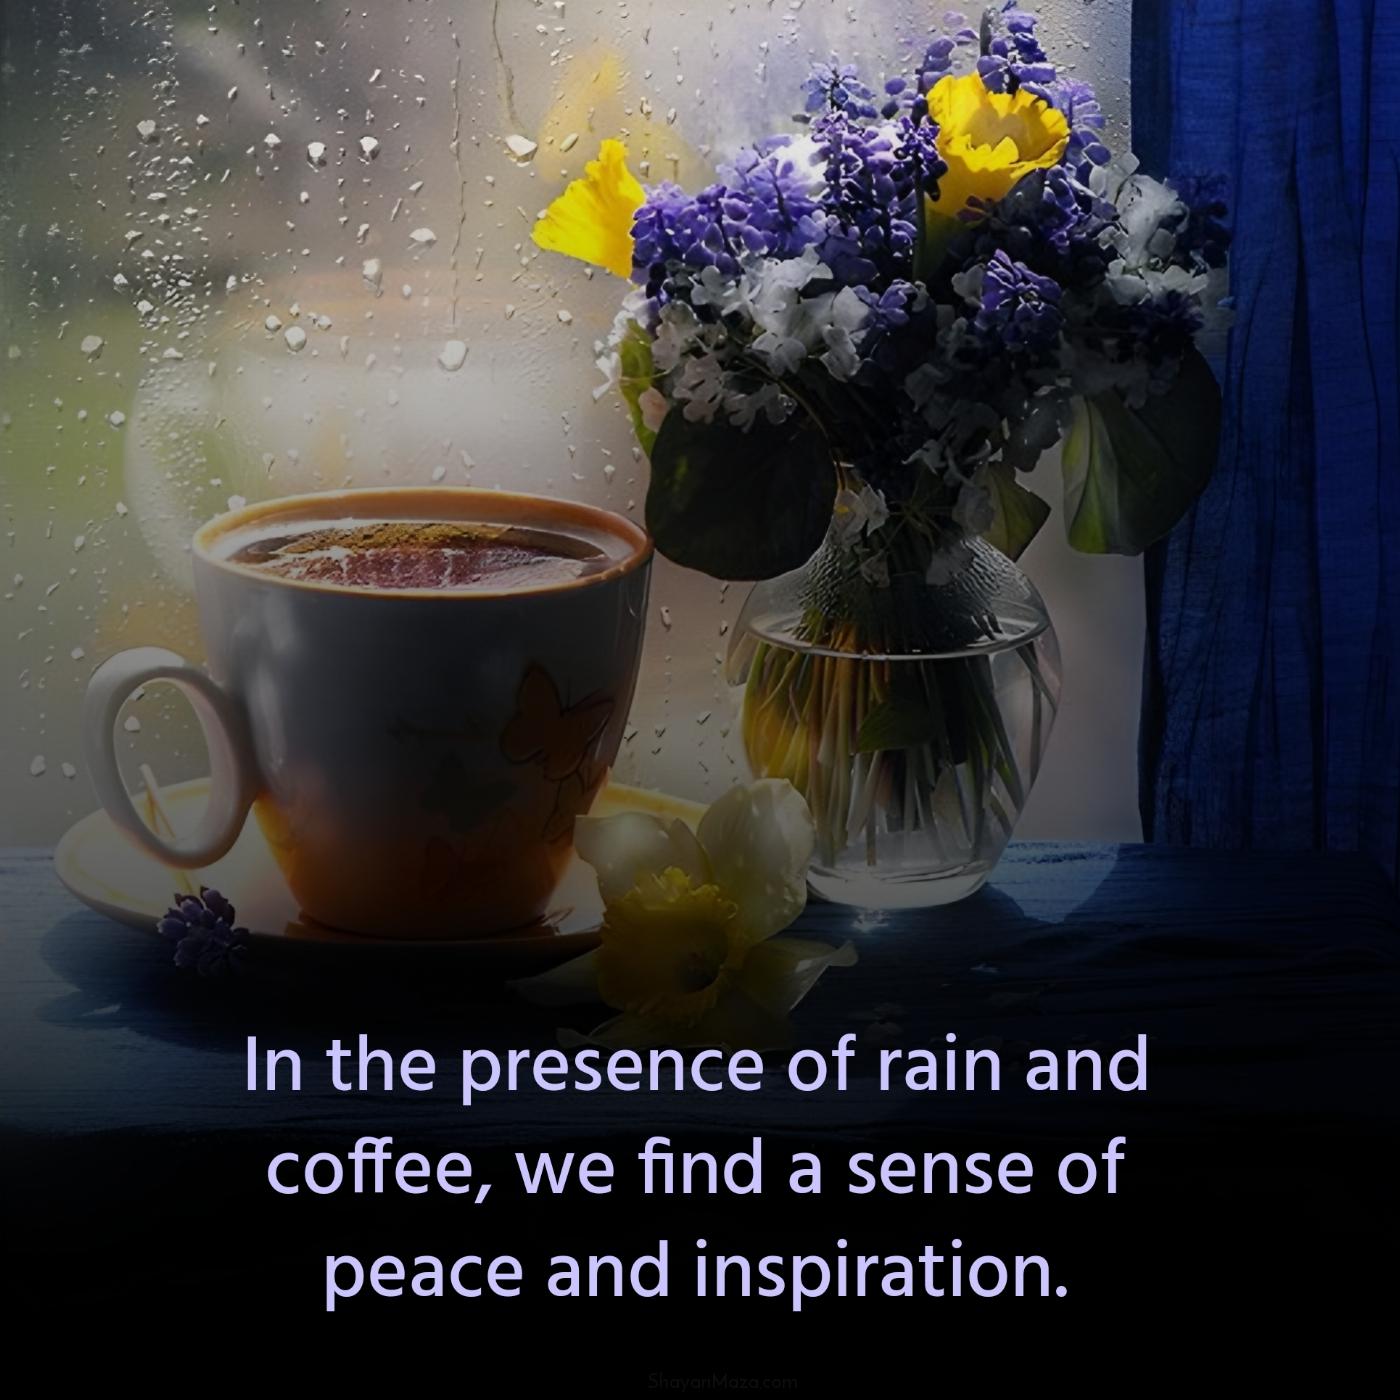 In the presence of rain and coffee we find a sense of peace